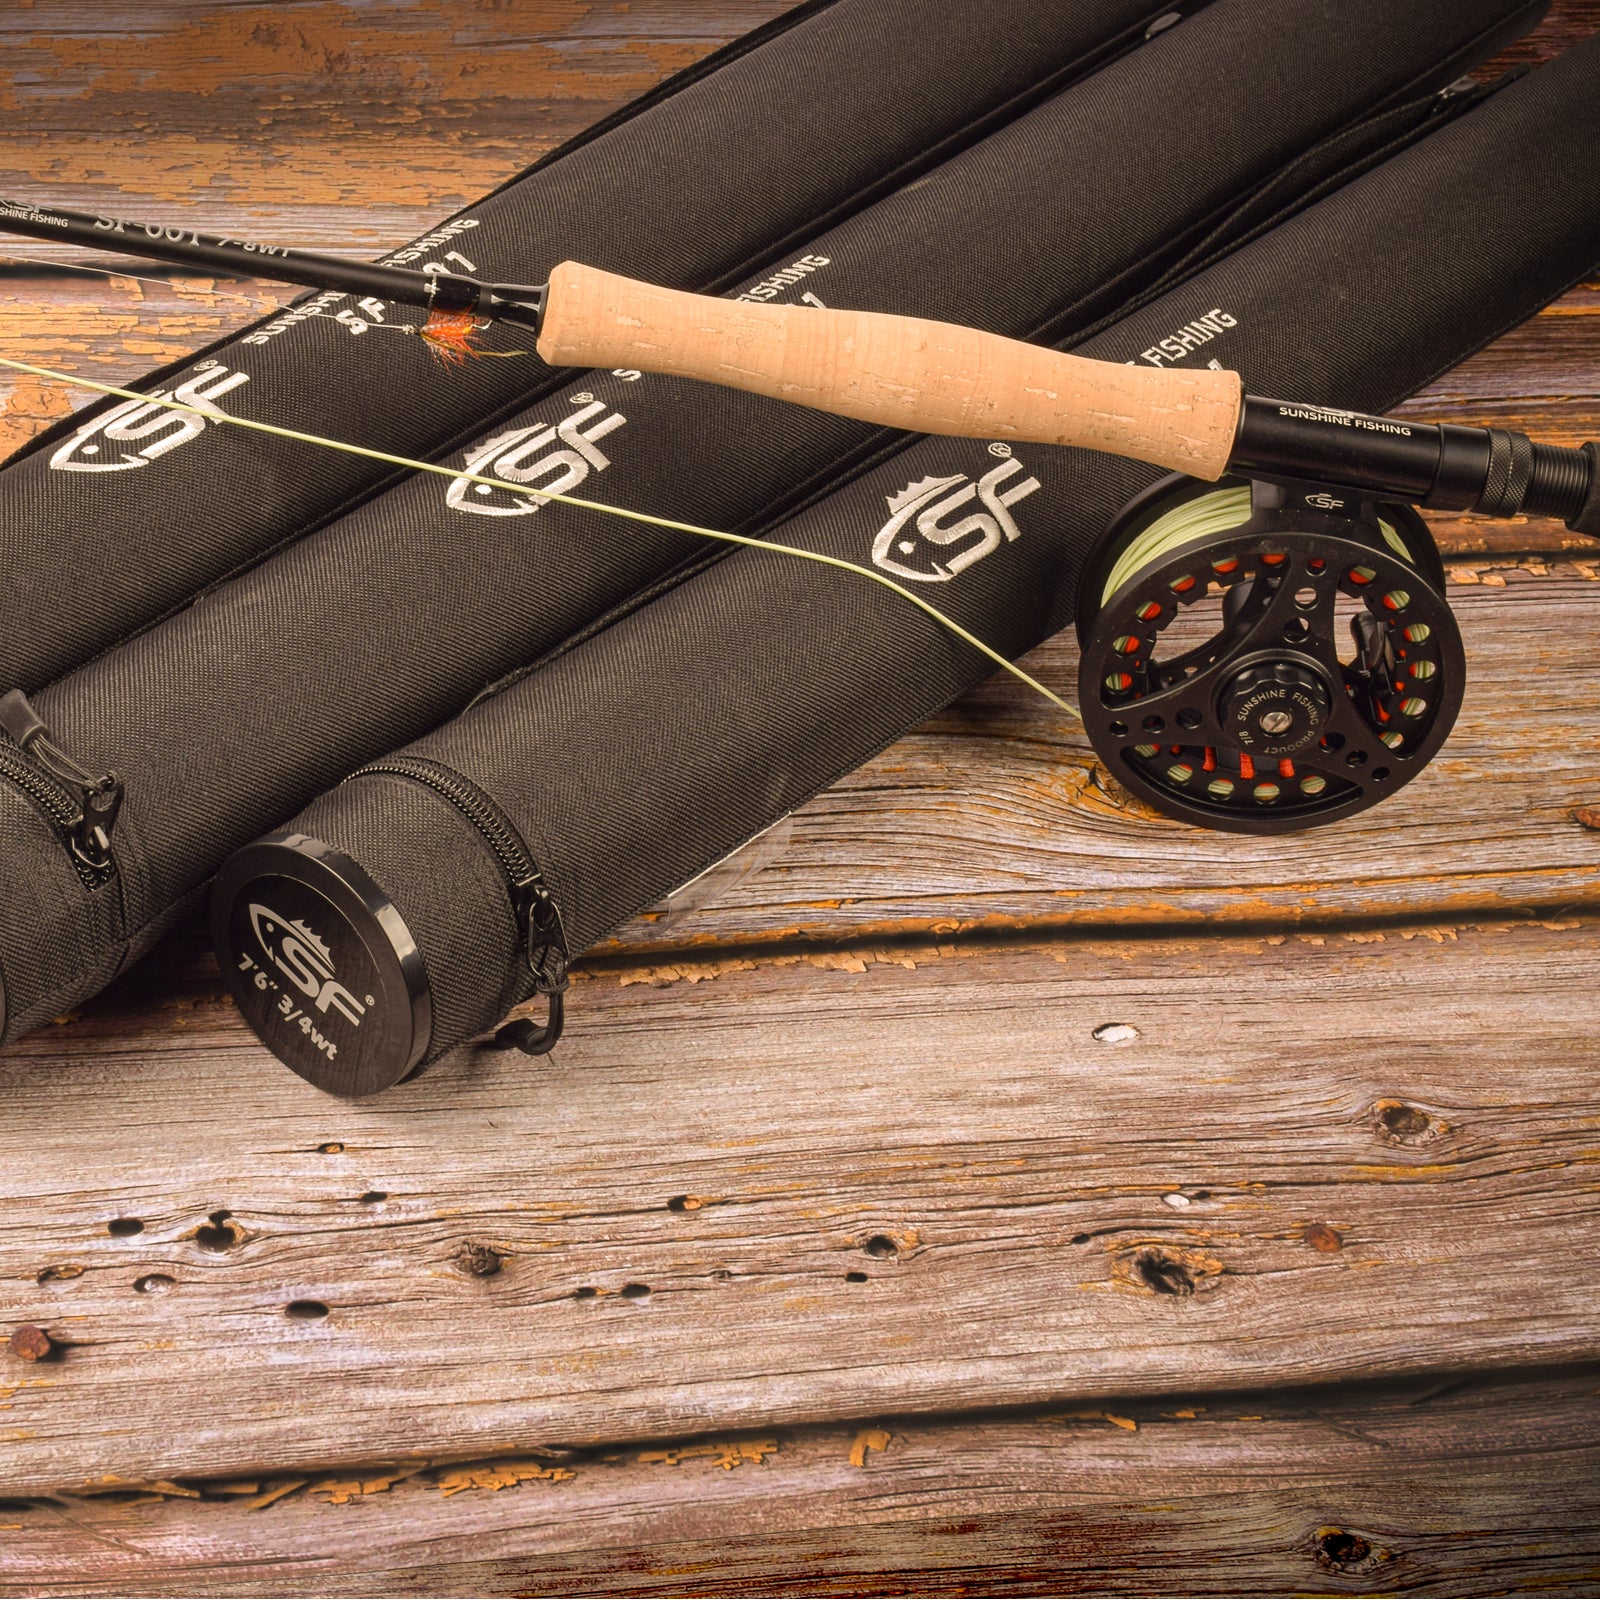 SF Fly Fishing Medium-Fast Action Rod Combo Kit 4 Piece 5/6wt 9FT